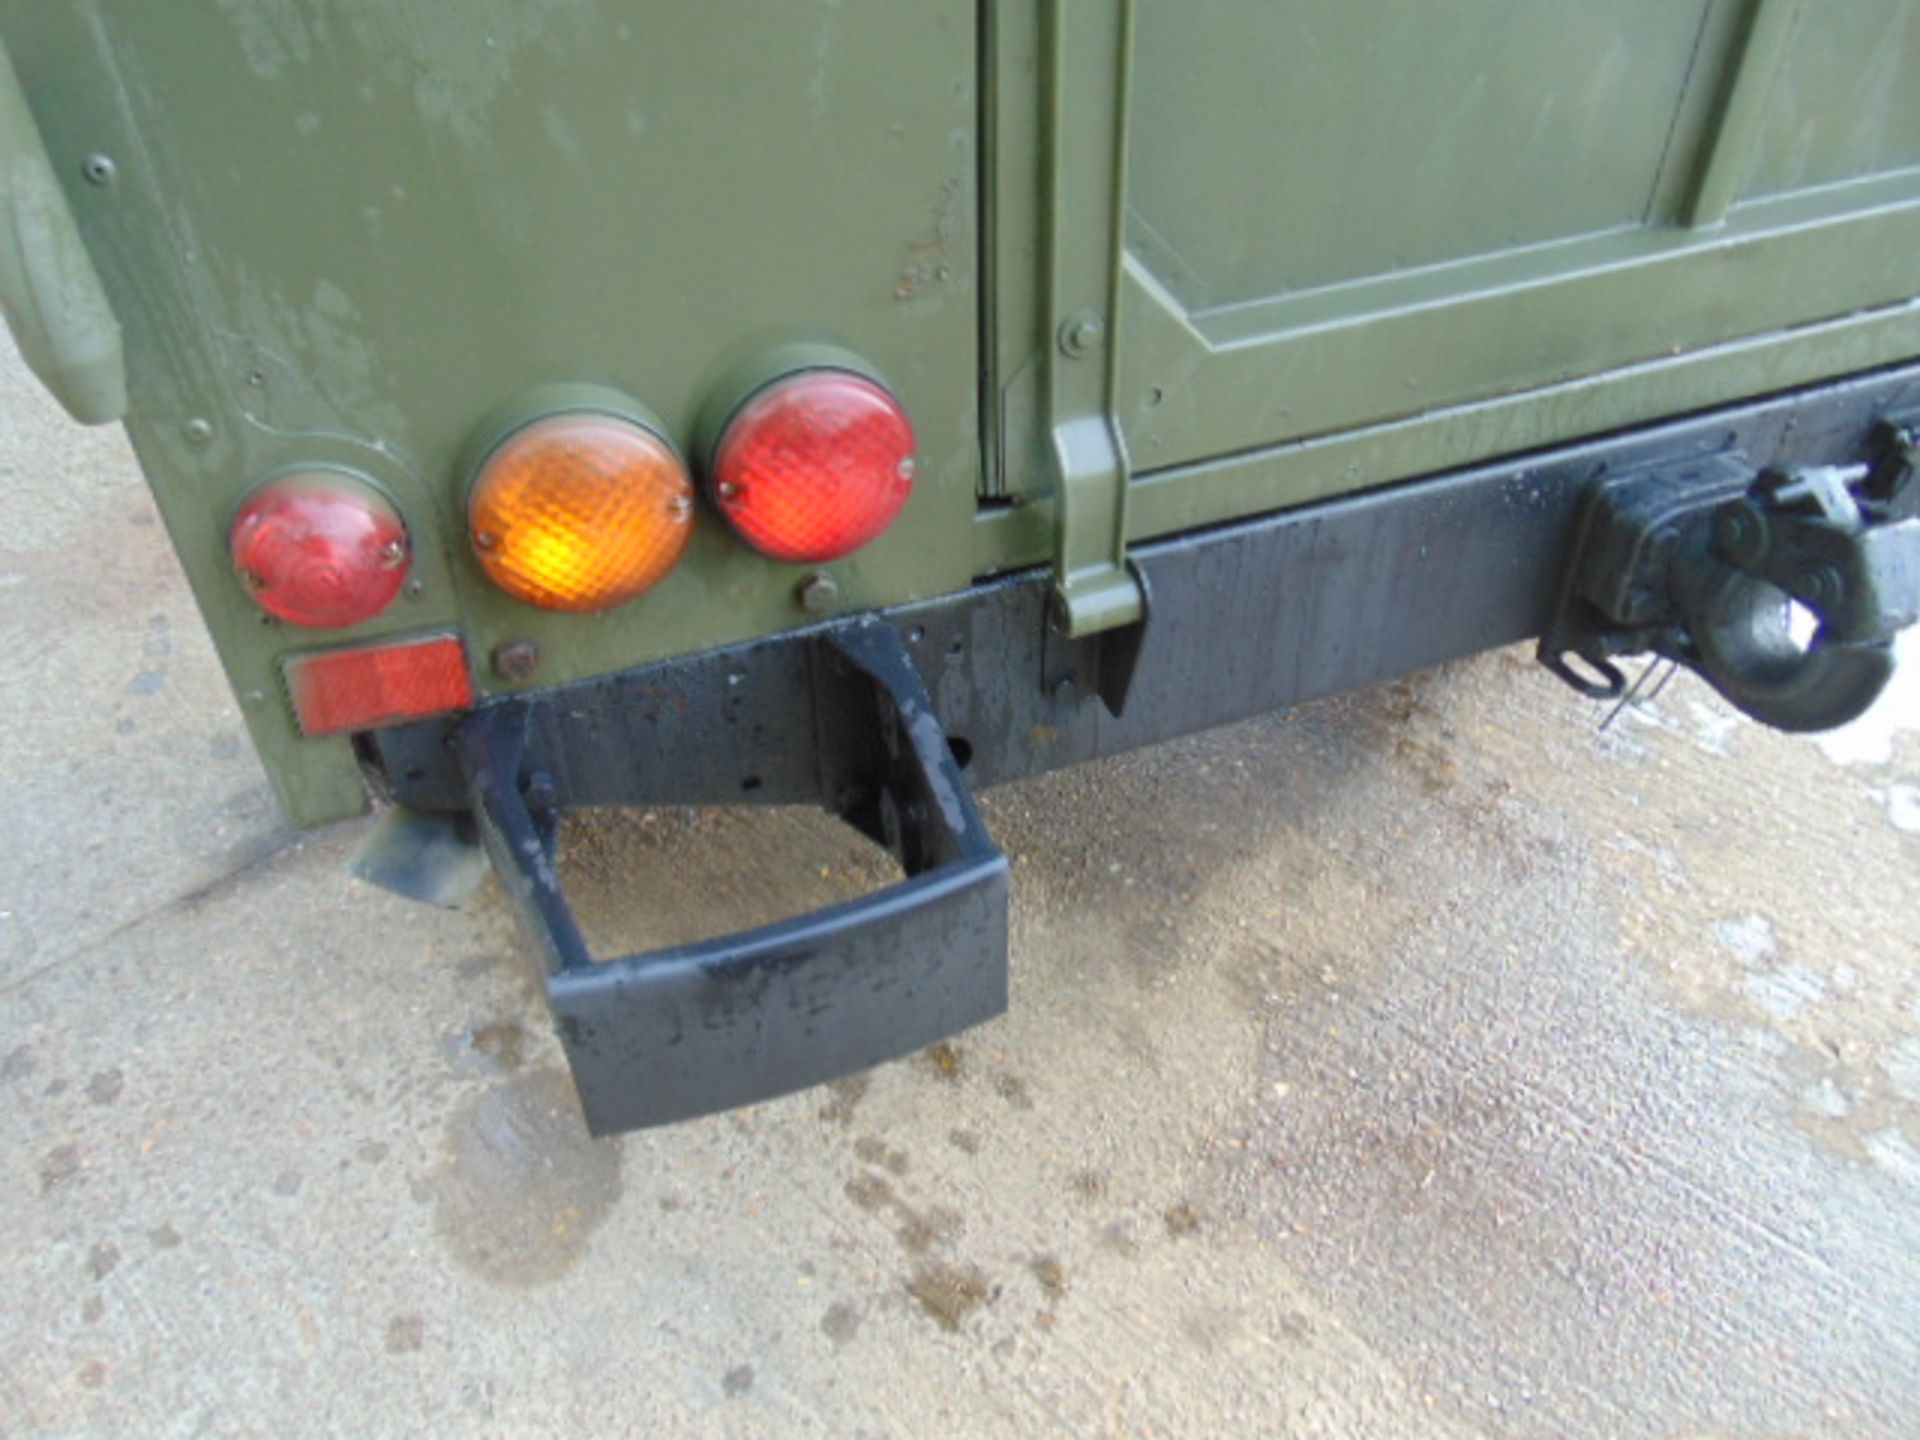 Military Specification Land Rover Wolf 110 Soft Top FFR - Image 17 of 25